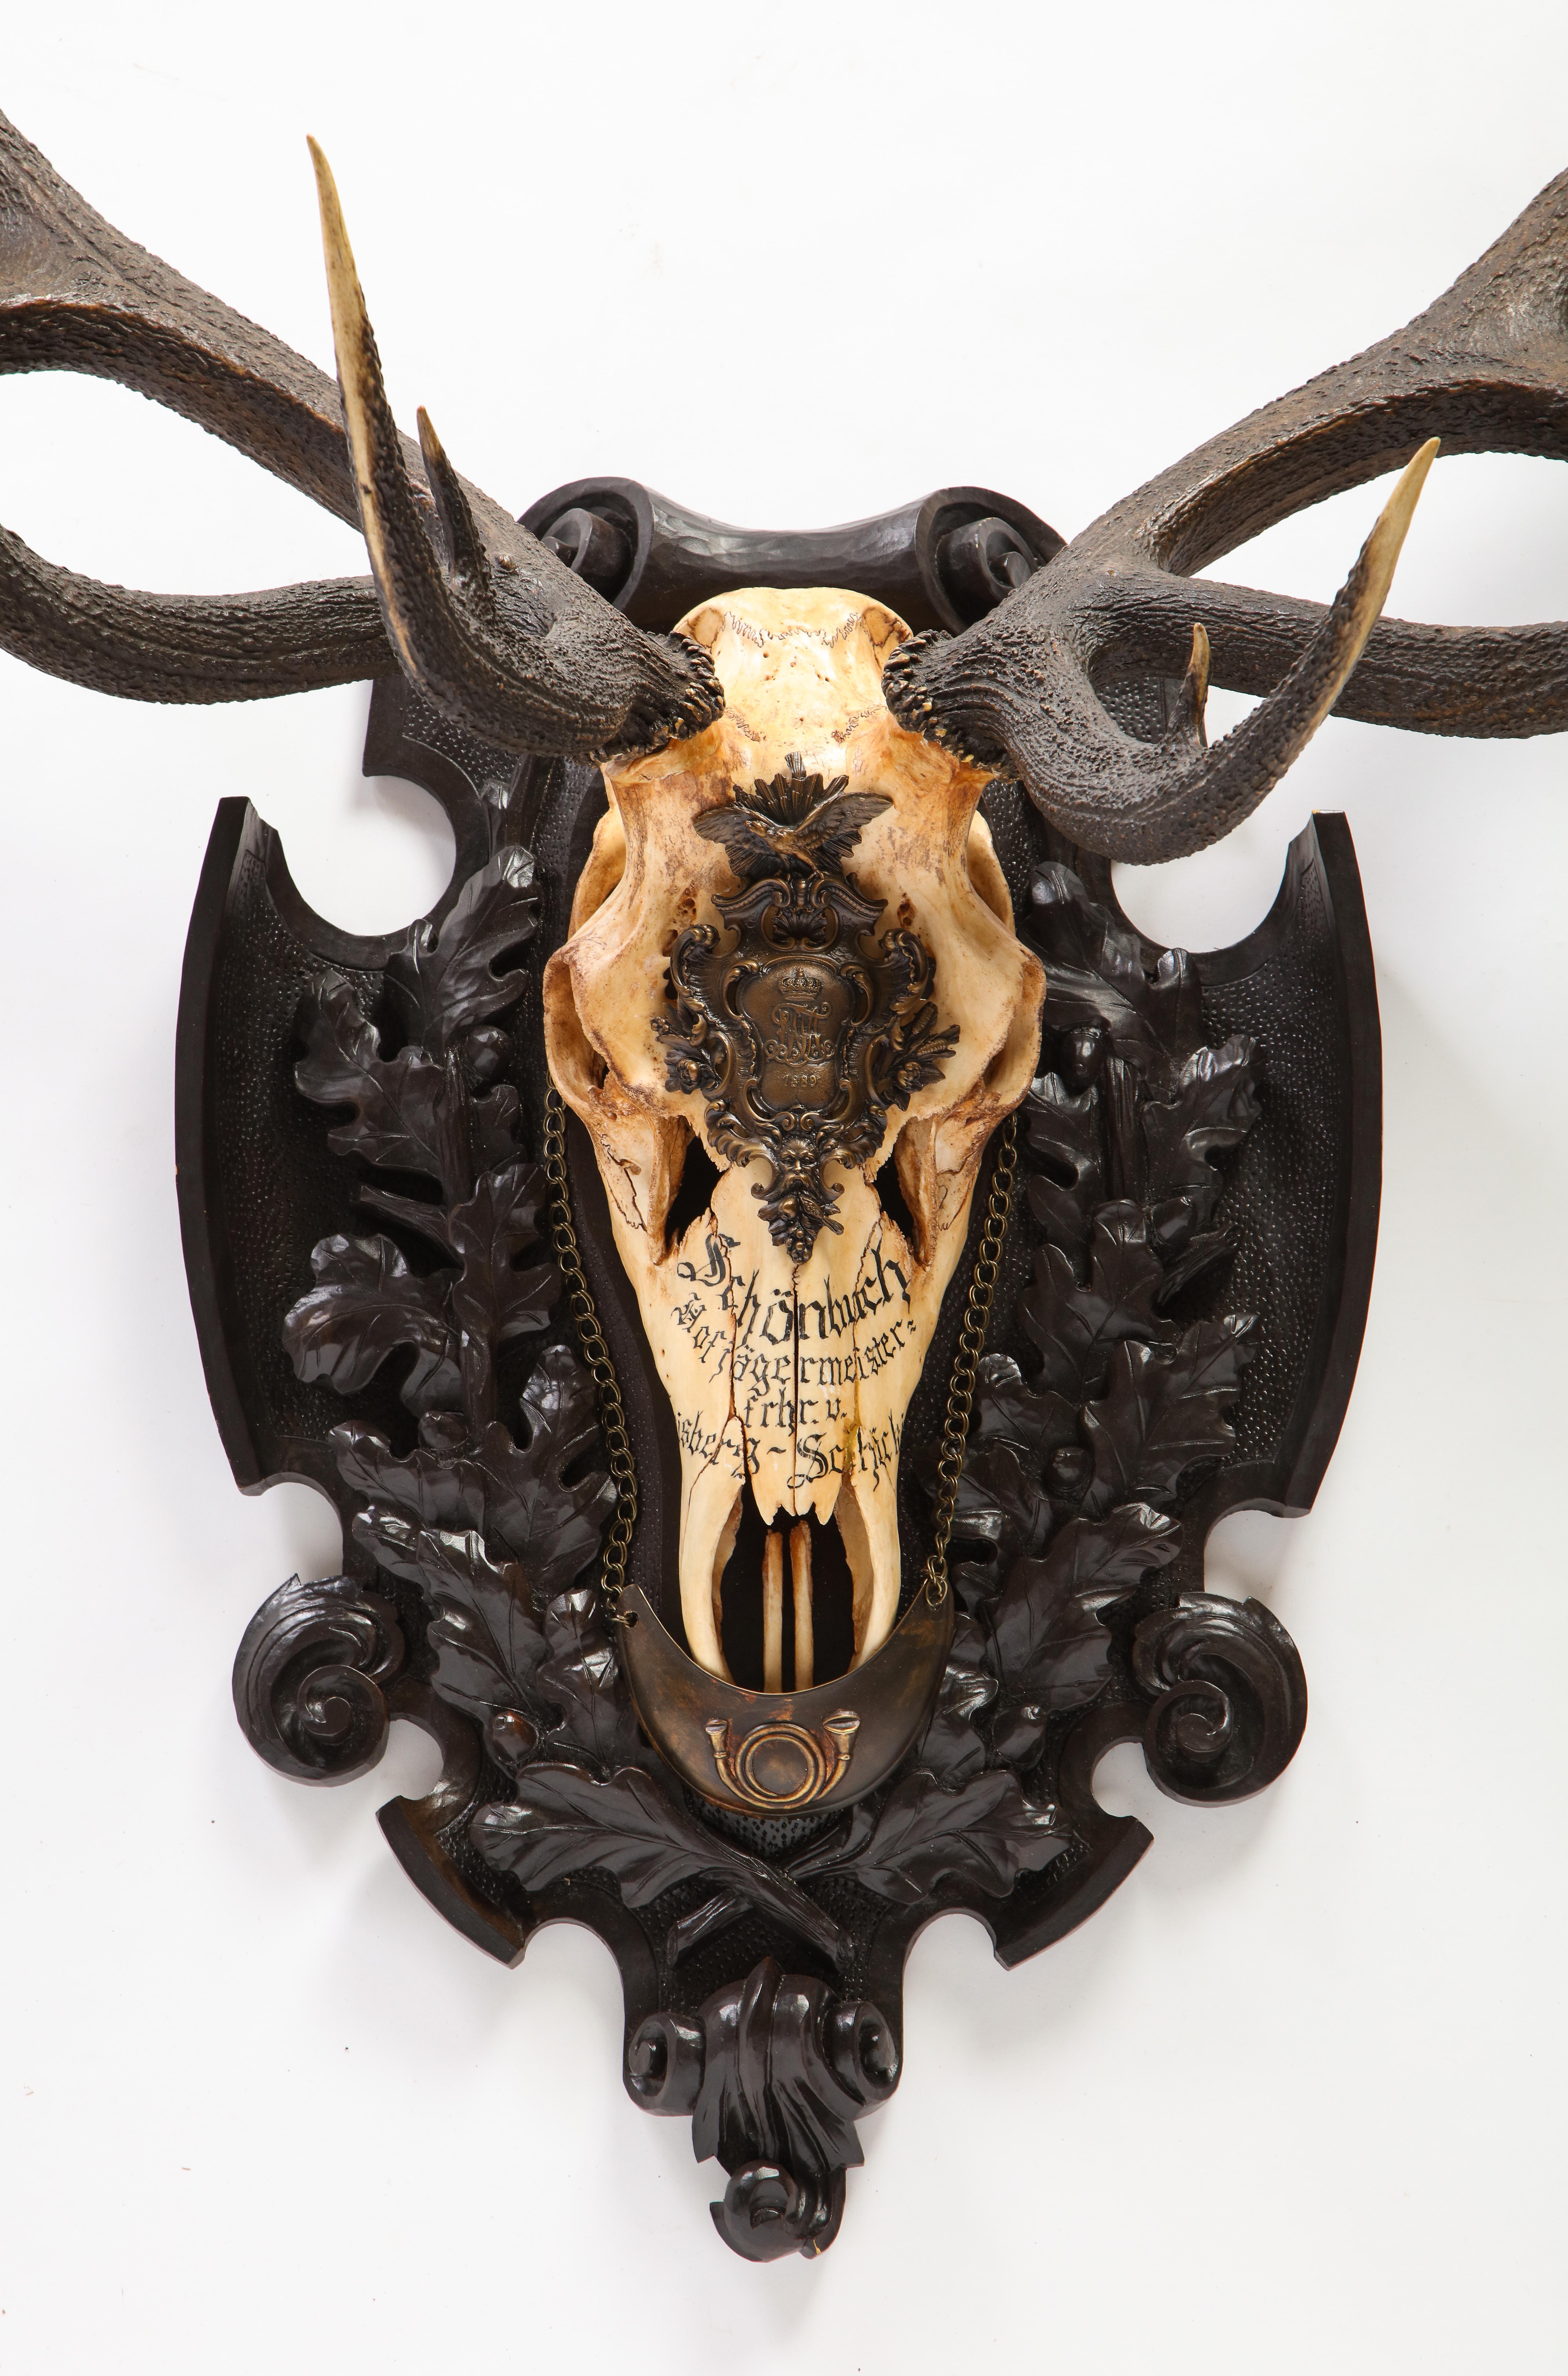 A distinctive Swiss 'Black Forest' large antler trophy mount dated 1889. The piece is enhanced with a brushed metal hunting horn medallion suspended from a linked chain. A gothic German script adorns the head of the trophy along with an ornate